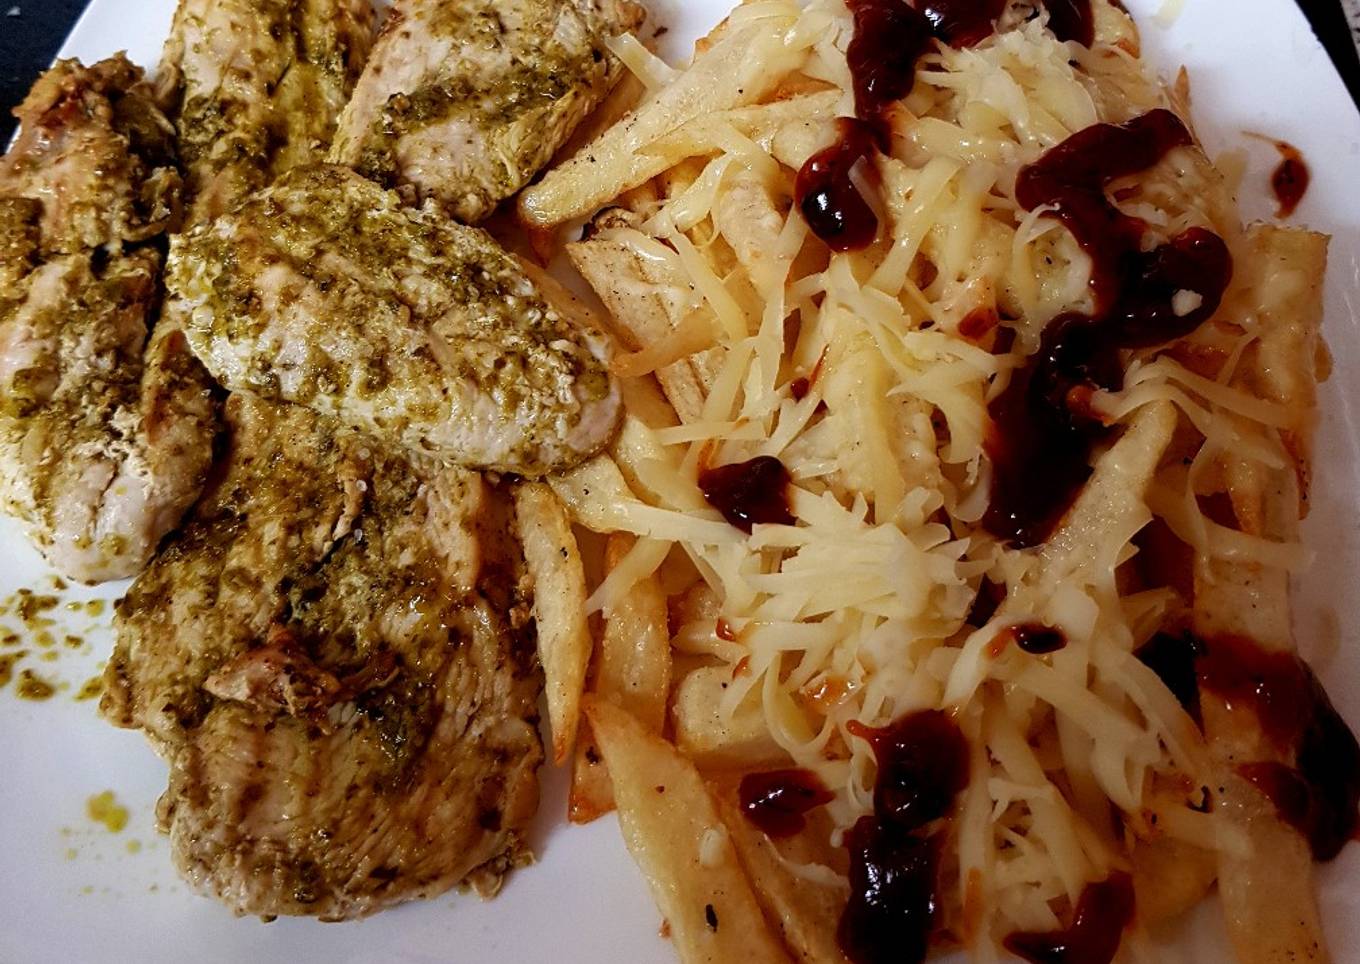 My Grilled Chicken with Pesto sauce and cheesy chips. 😙